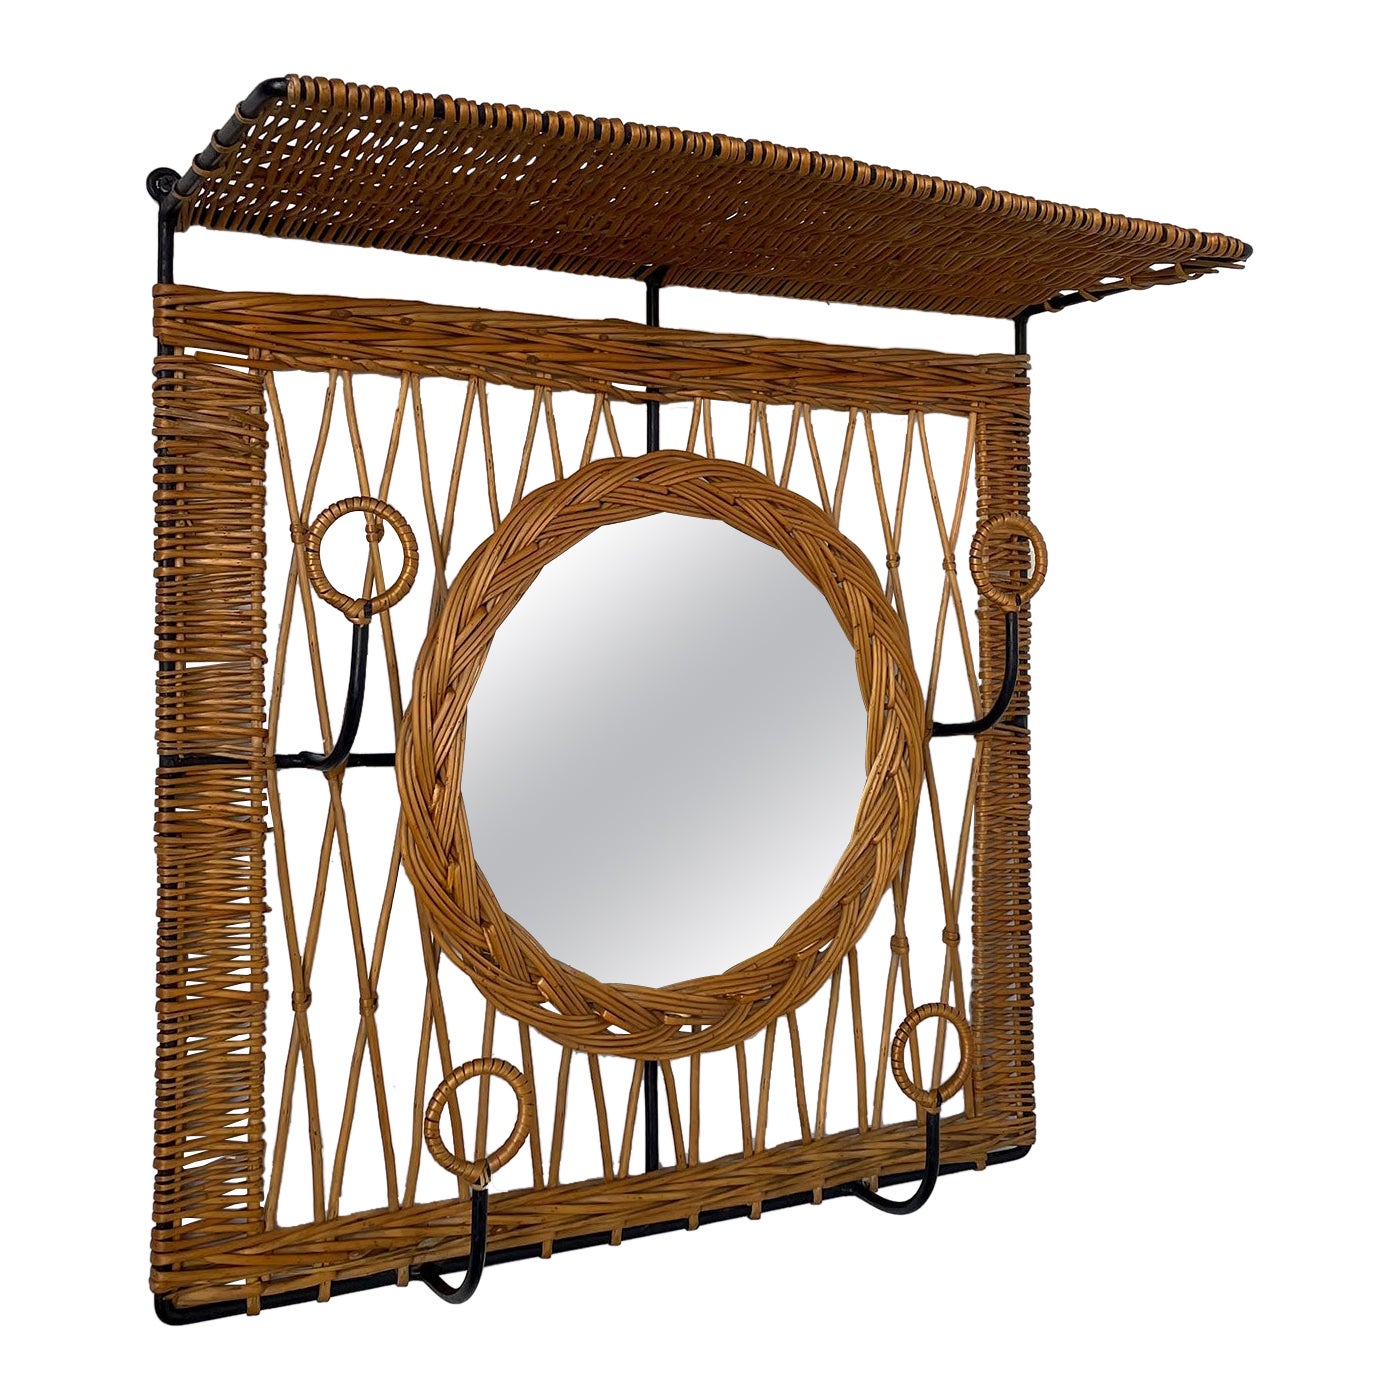 Jacques Adnet Style Wicker and Iron Mirrored Coat Rack